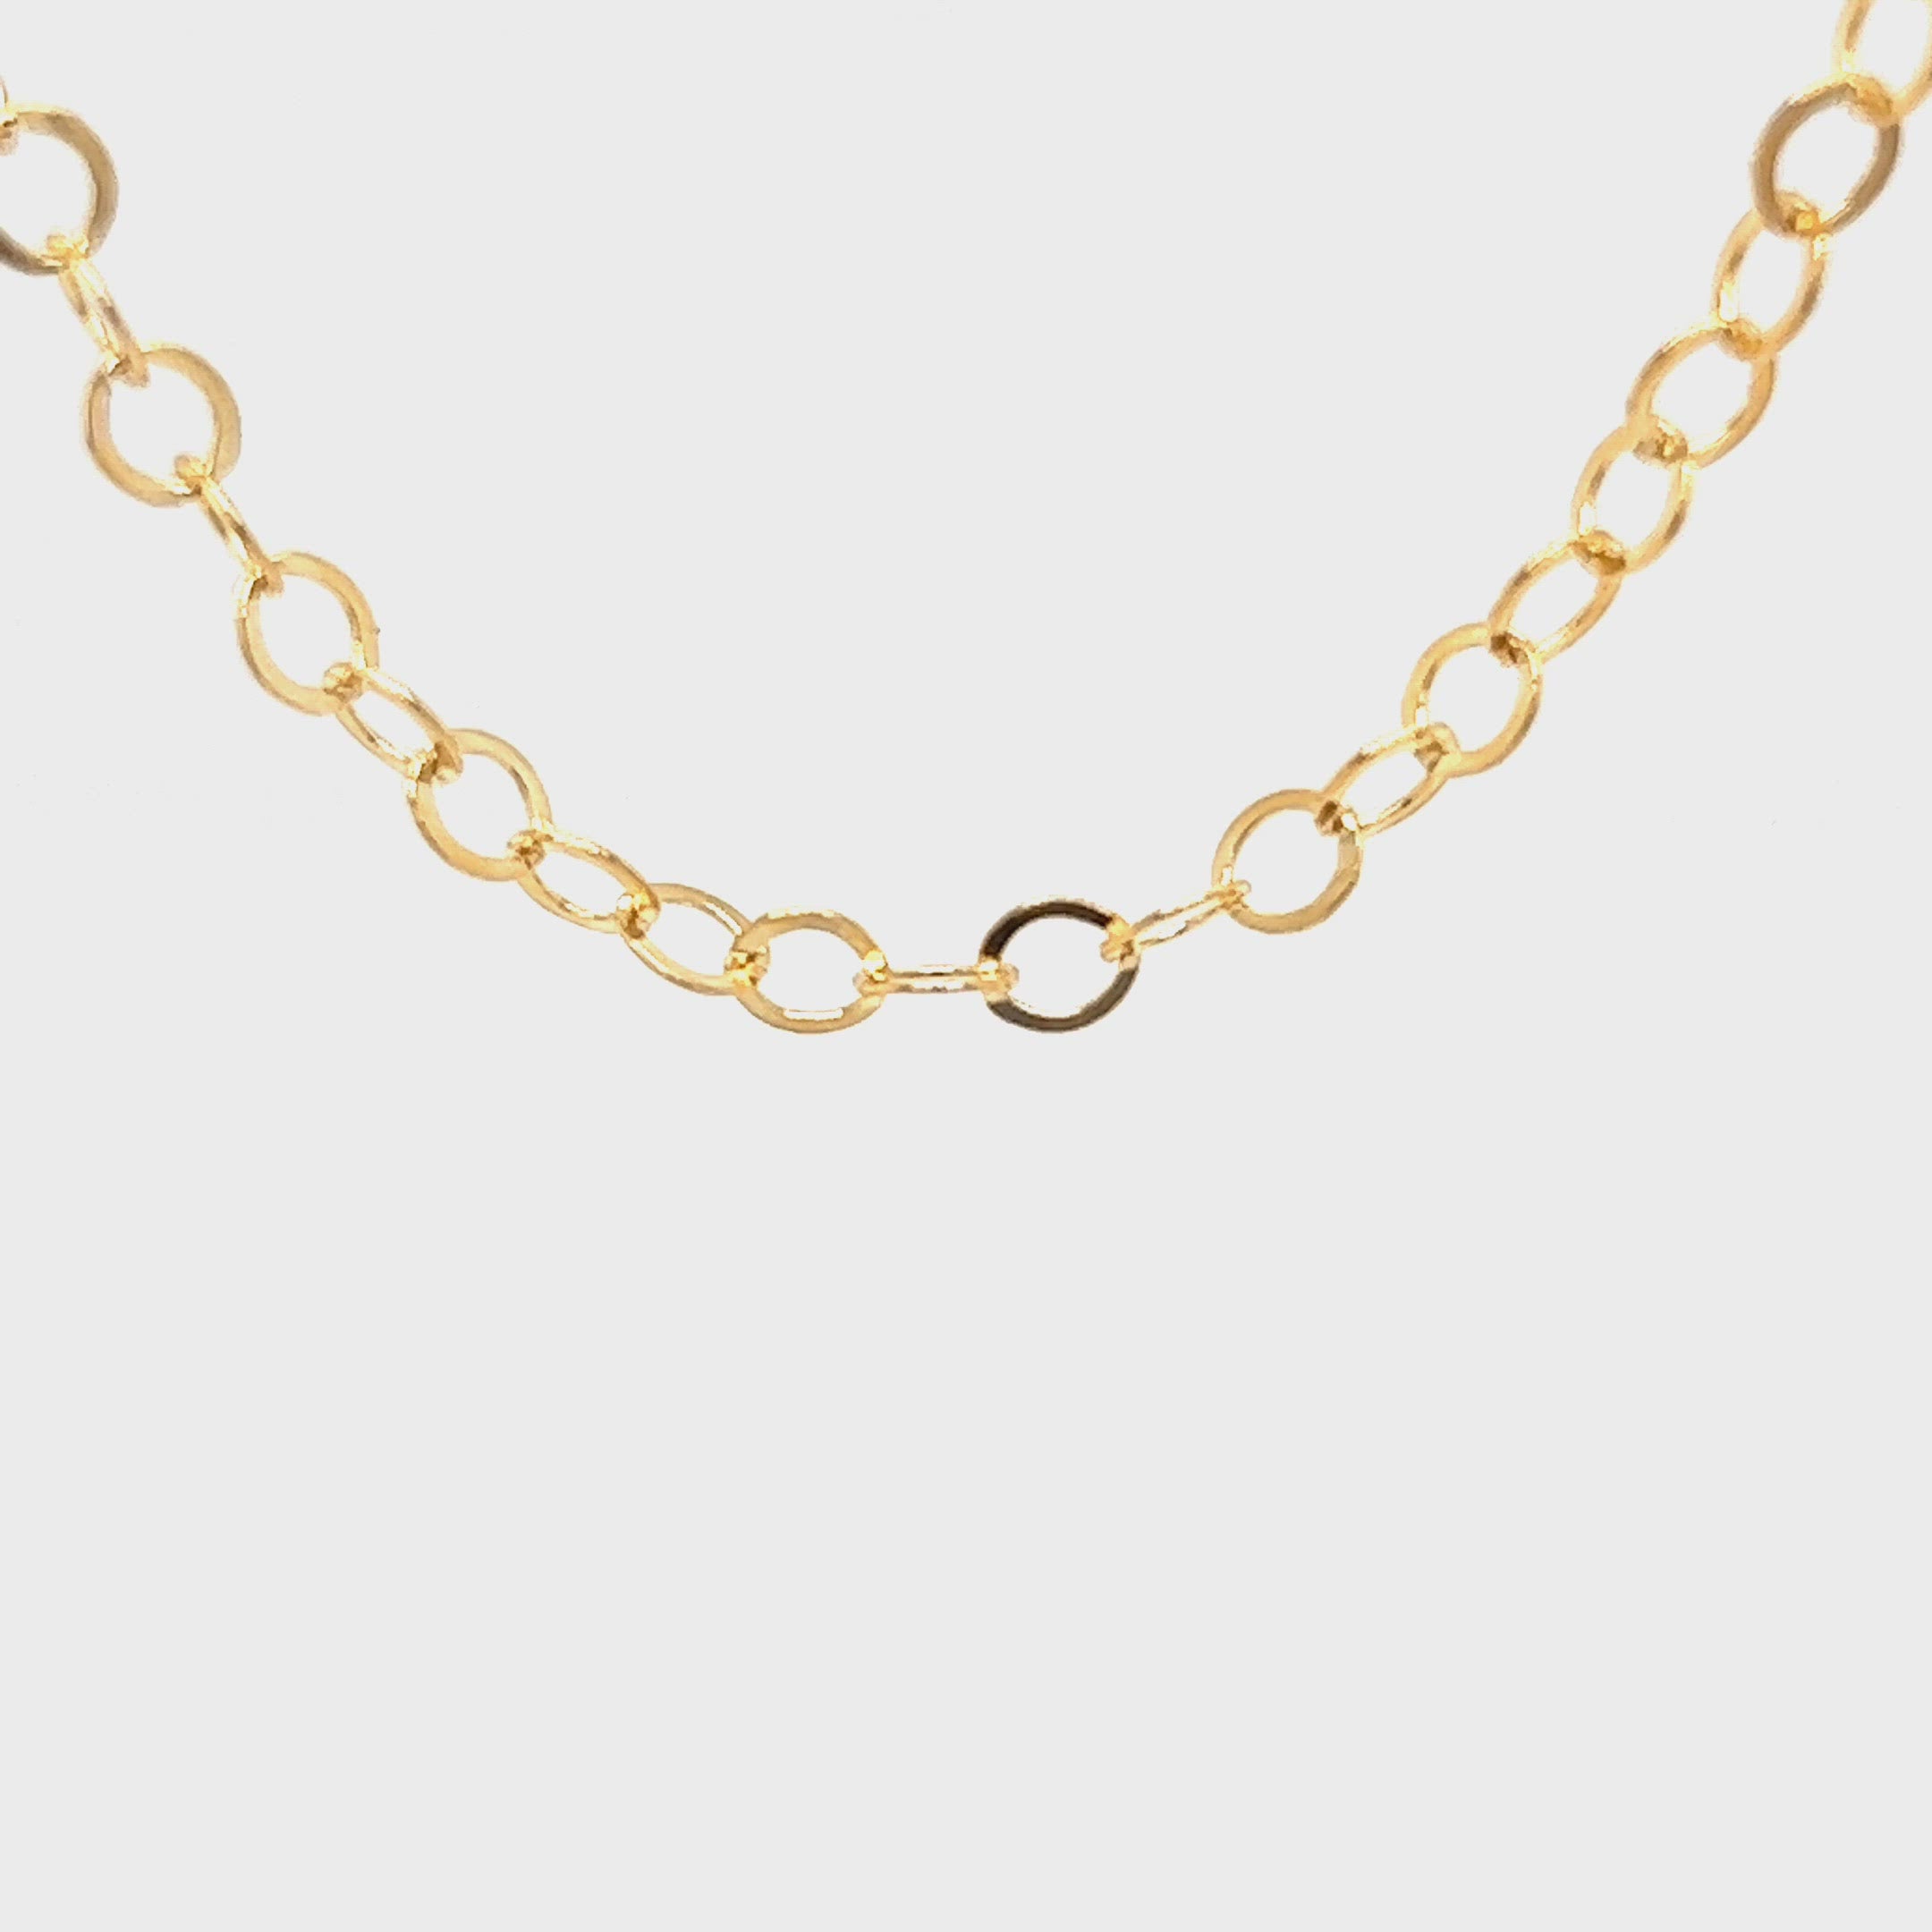 PEBBLE ON A CHAIN –